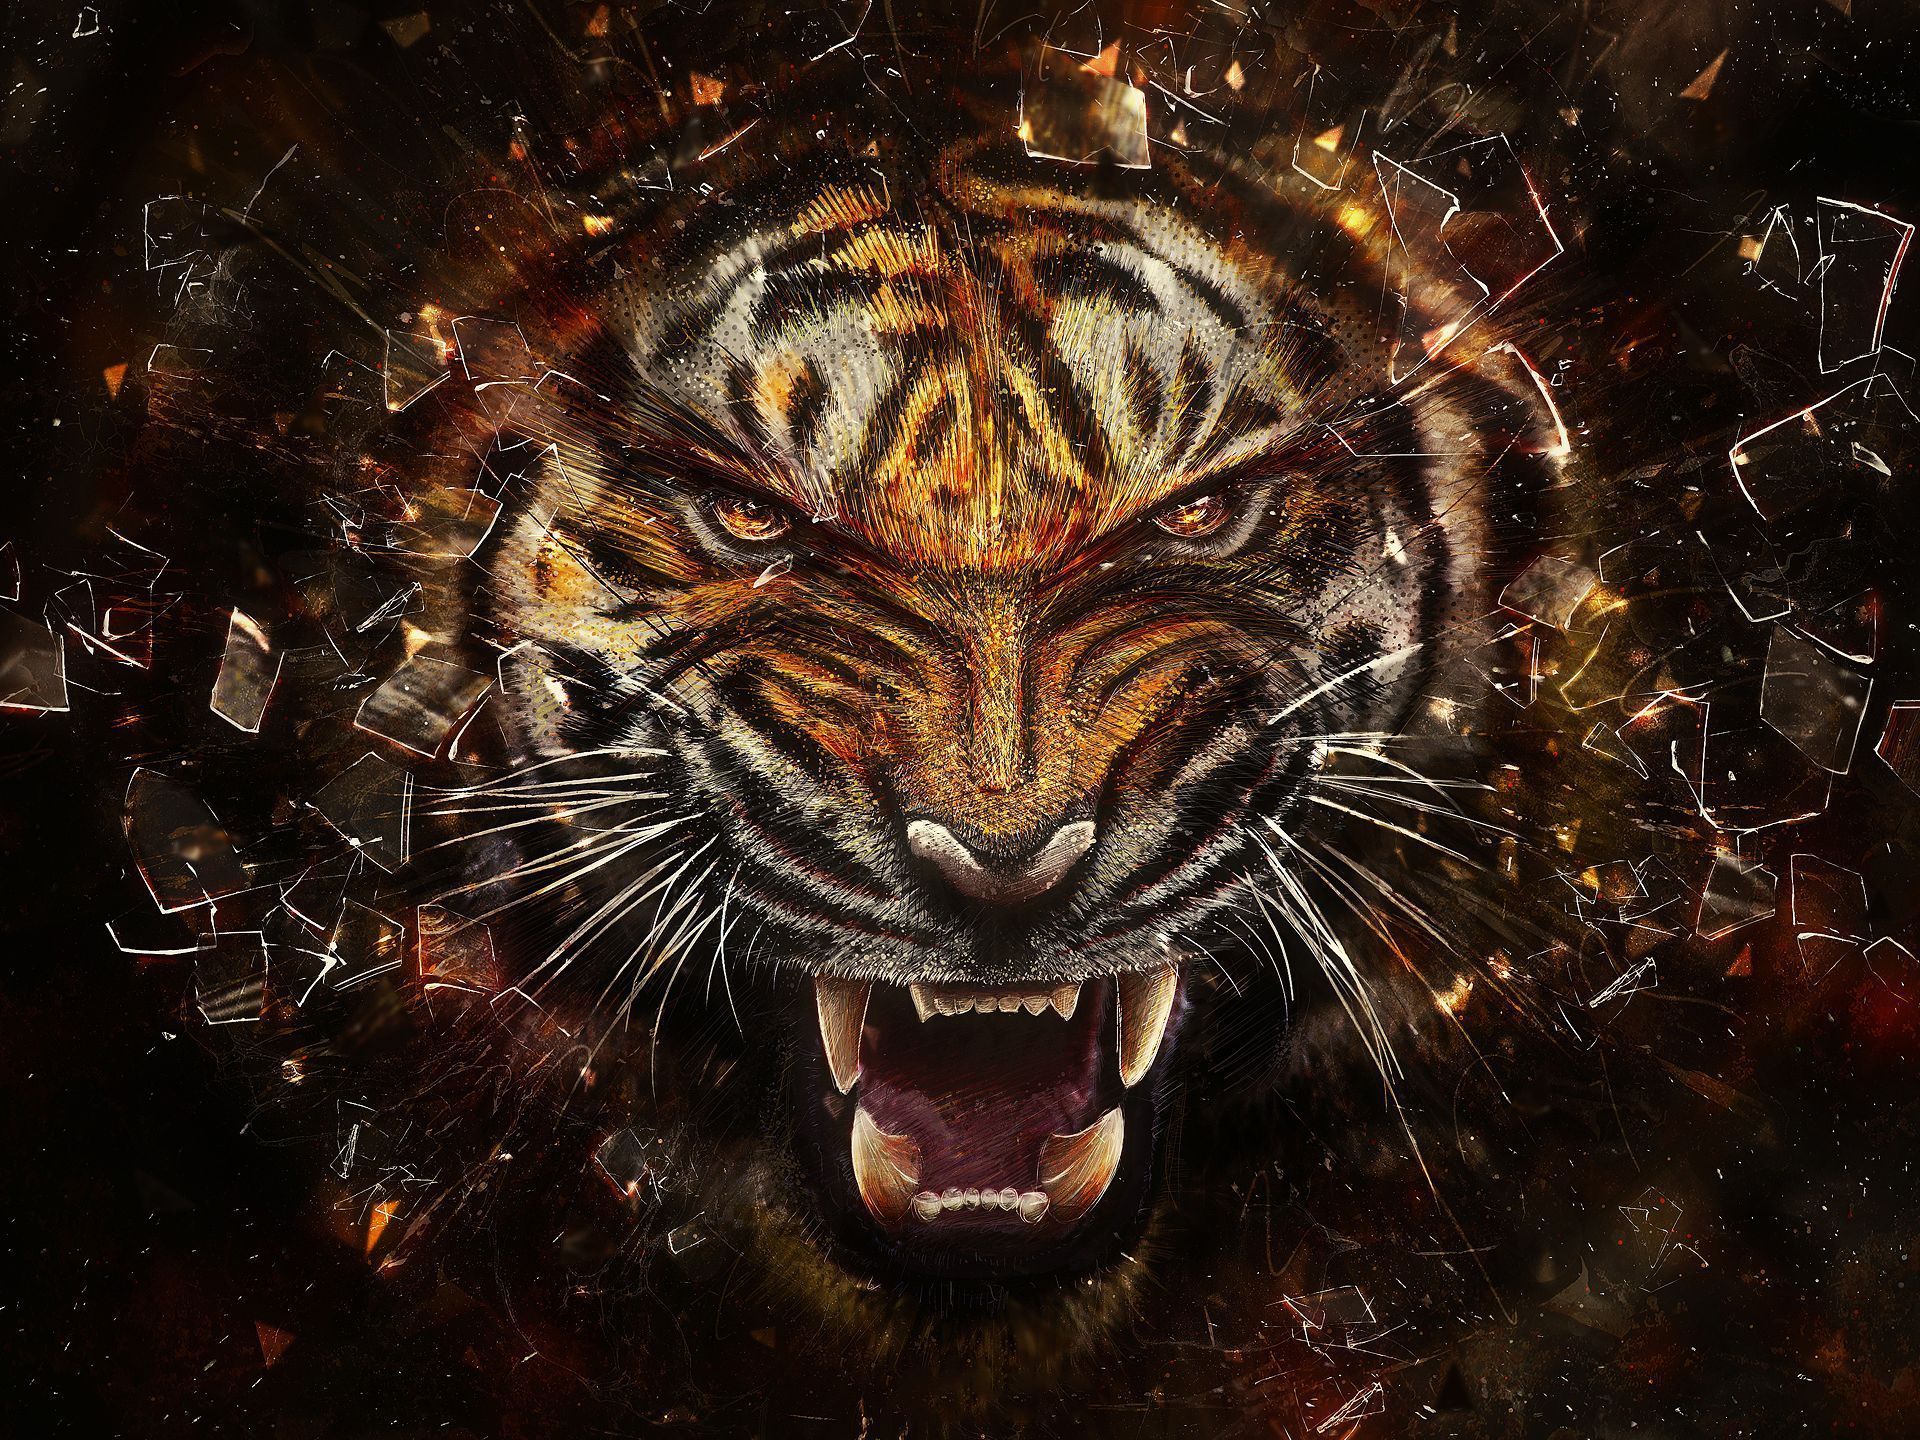 1066 Tiger HD Wallpapers Backgrounds - Wallpaper Abyss